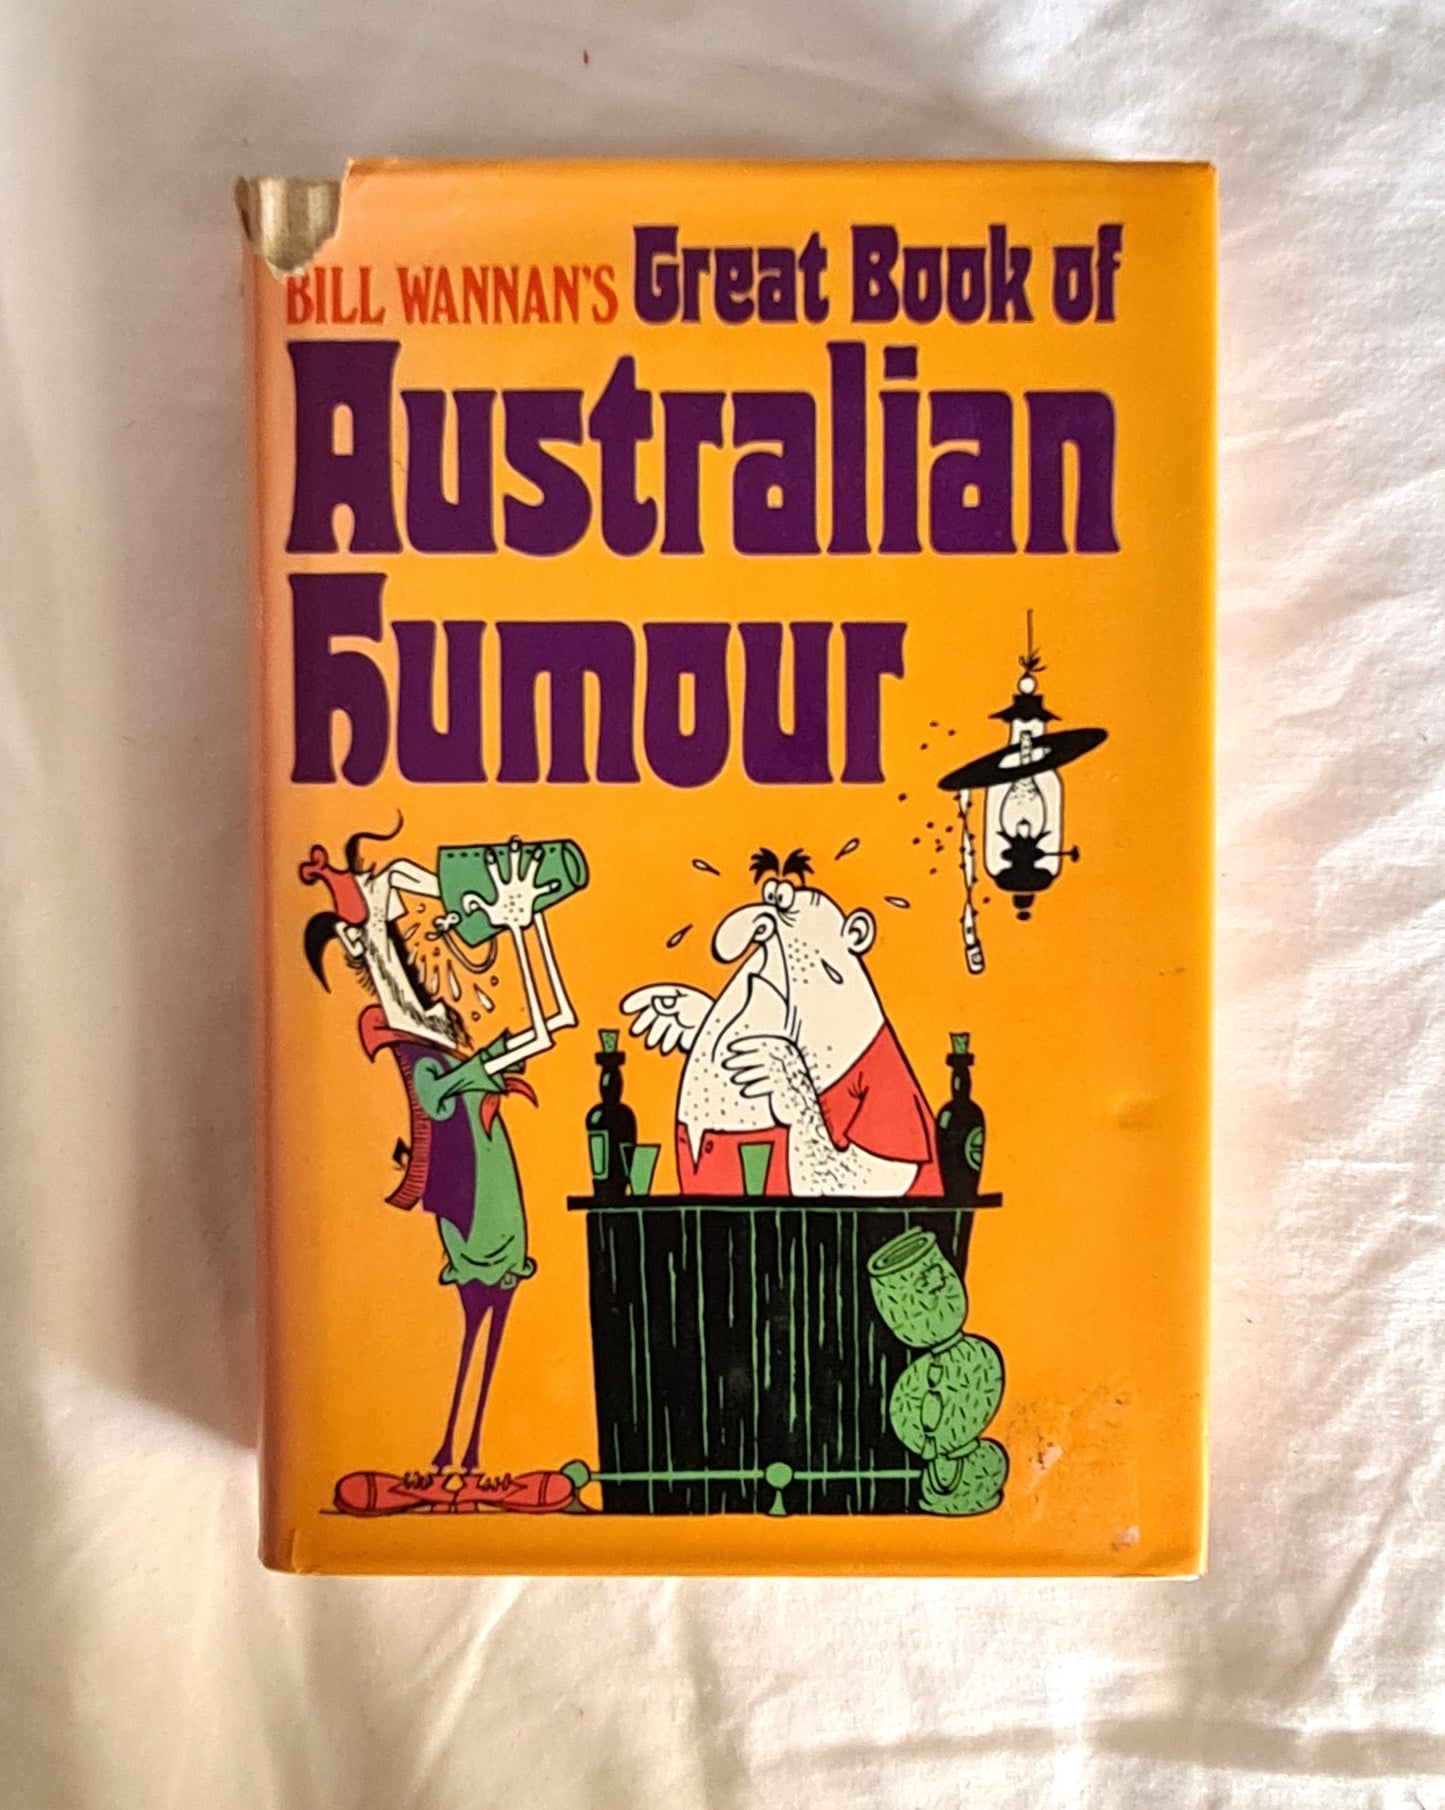 Bill Wannan’s Great Book of Australian Humour  by Bill Wannan  Illustrated by Vane Lindesay